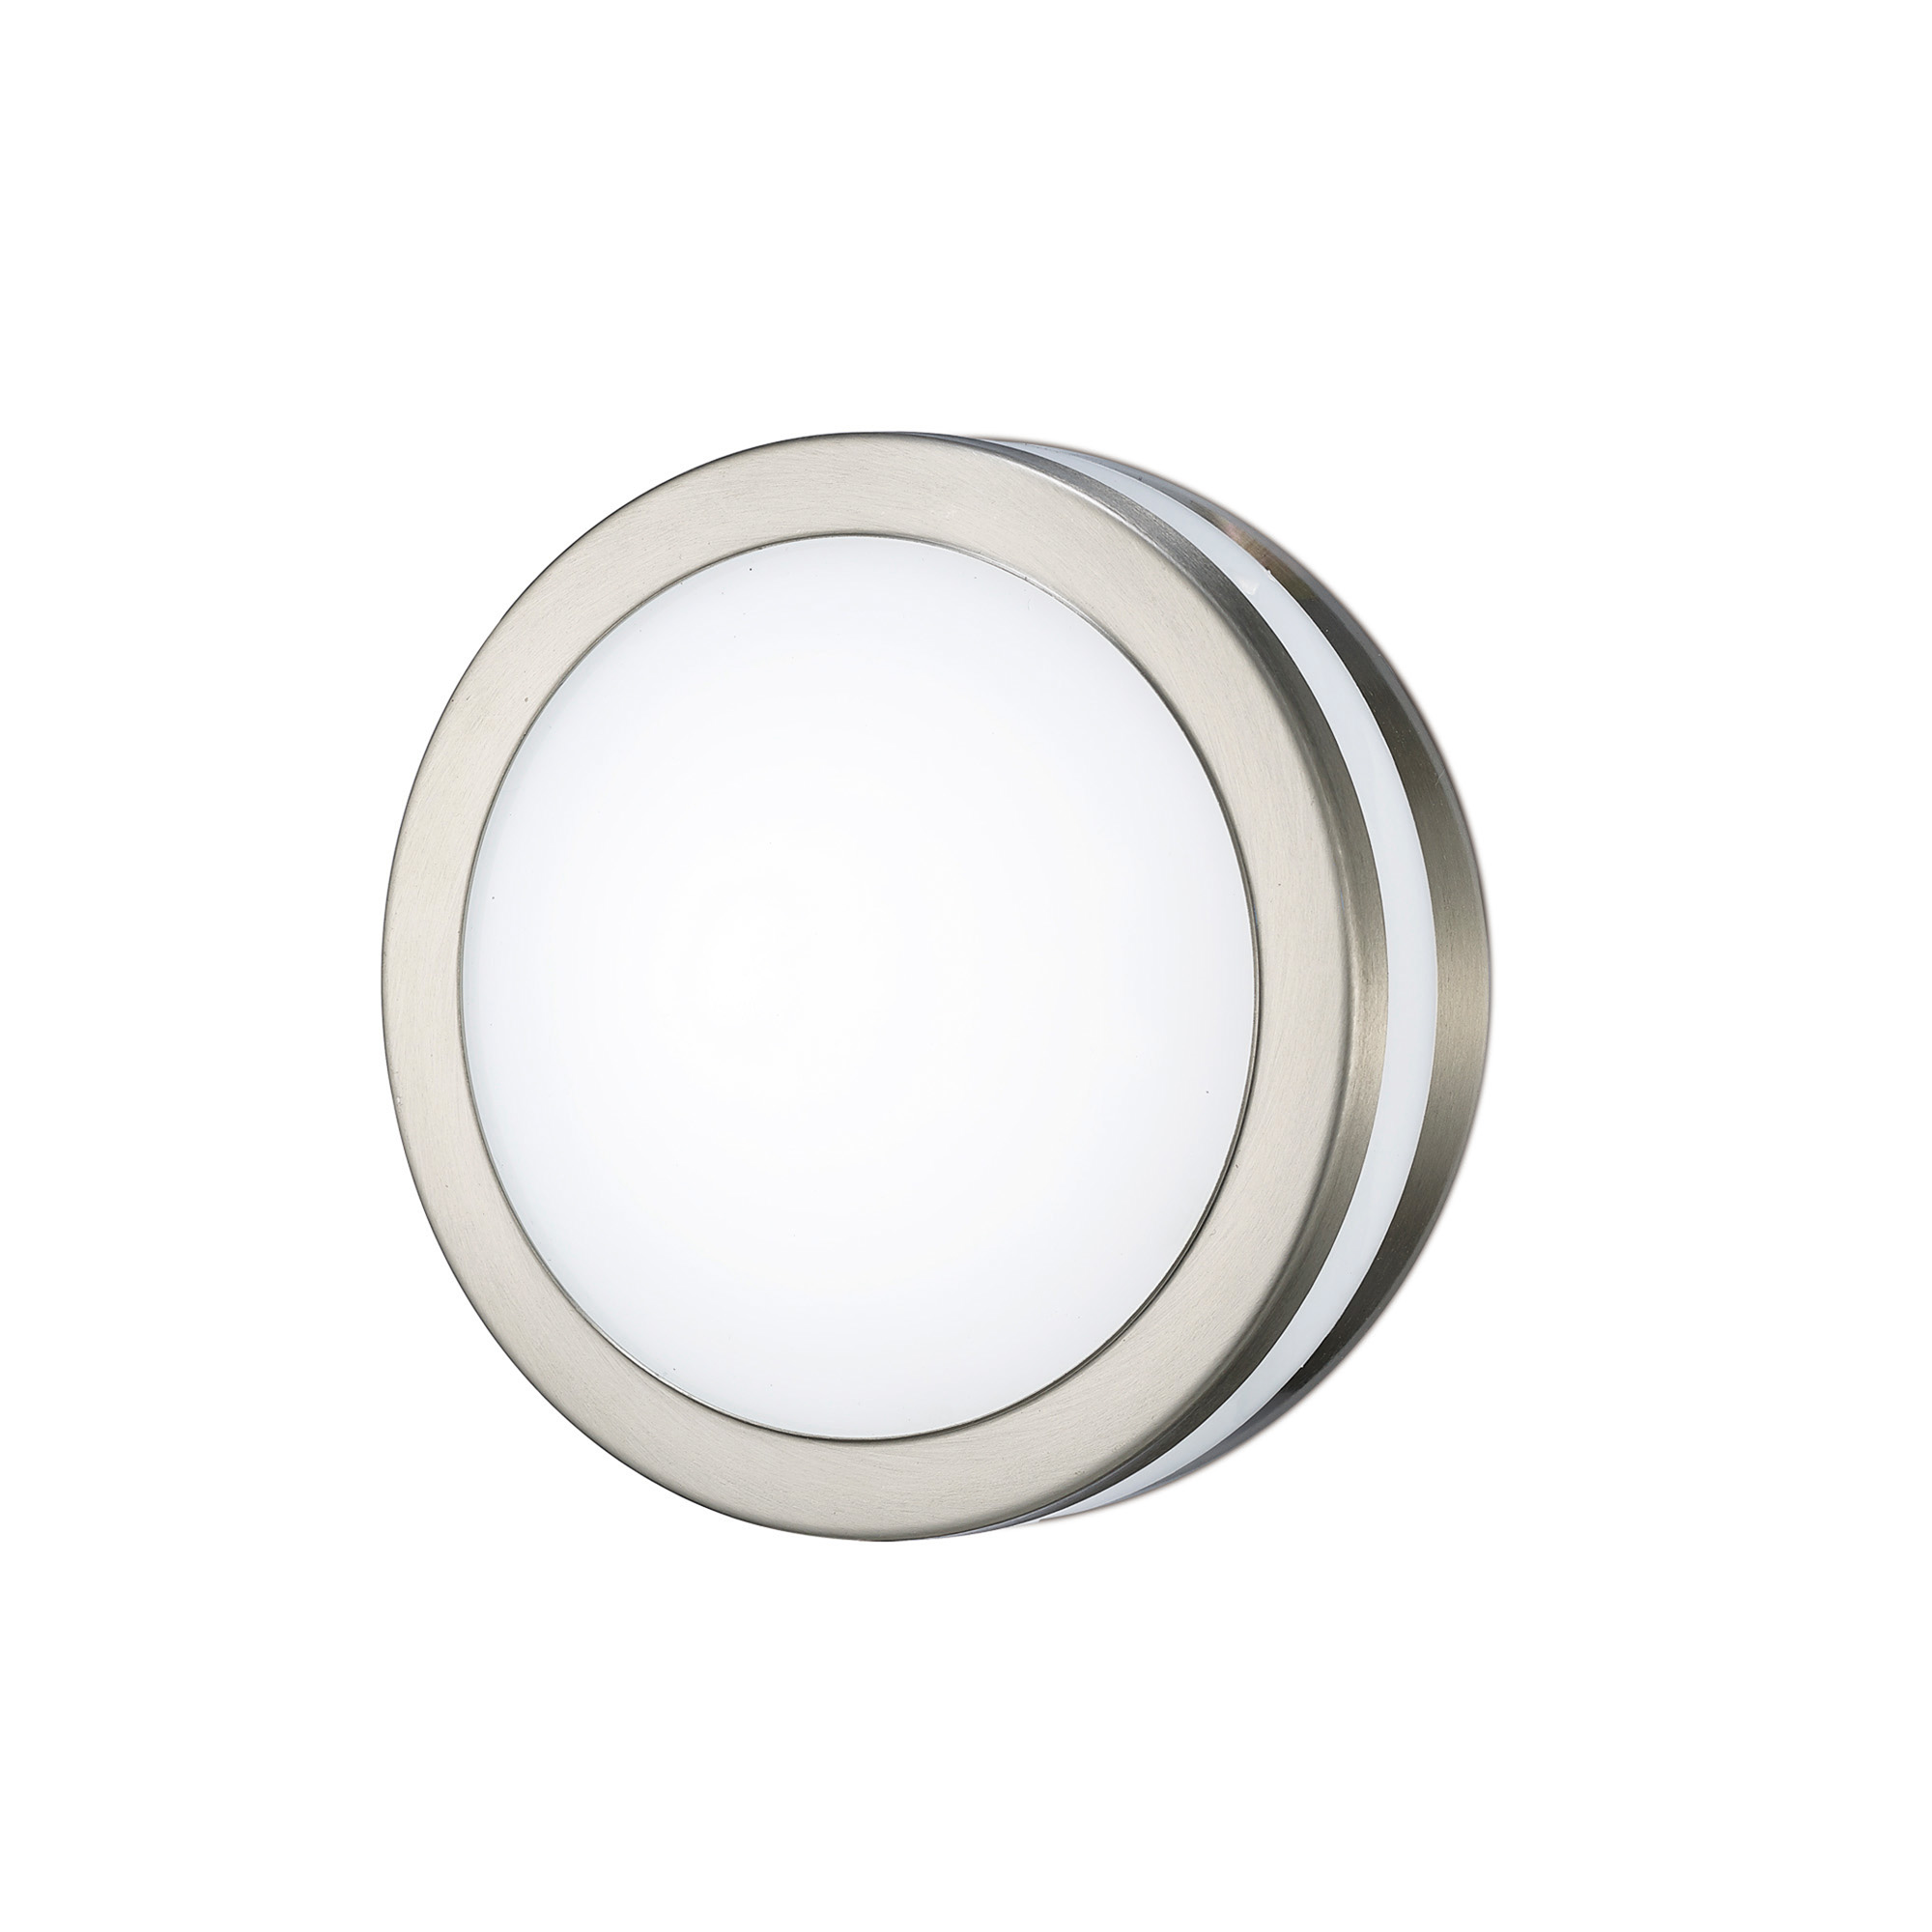 D0080  Aldo IP44 2.4W LED Round Wall Lamp Stainless Steel